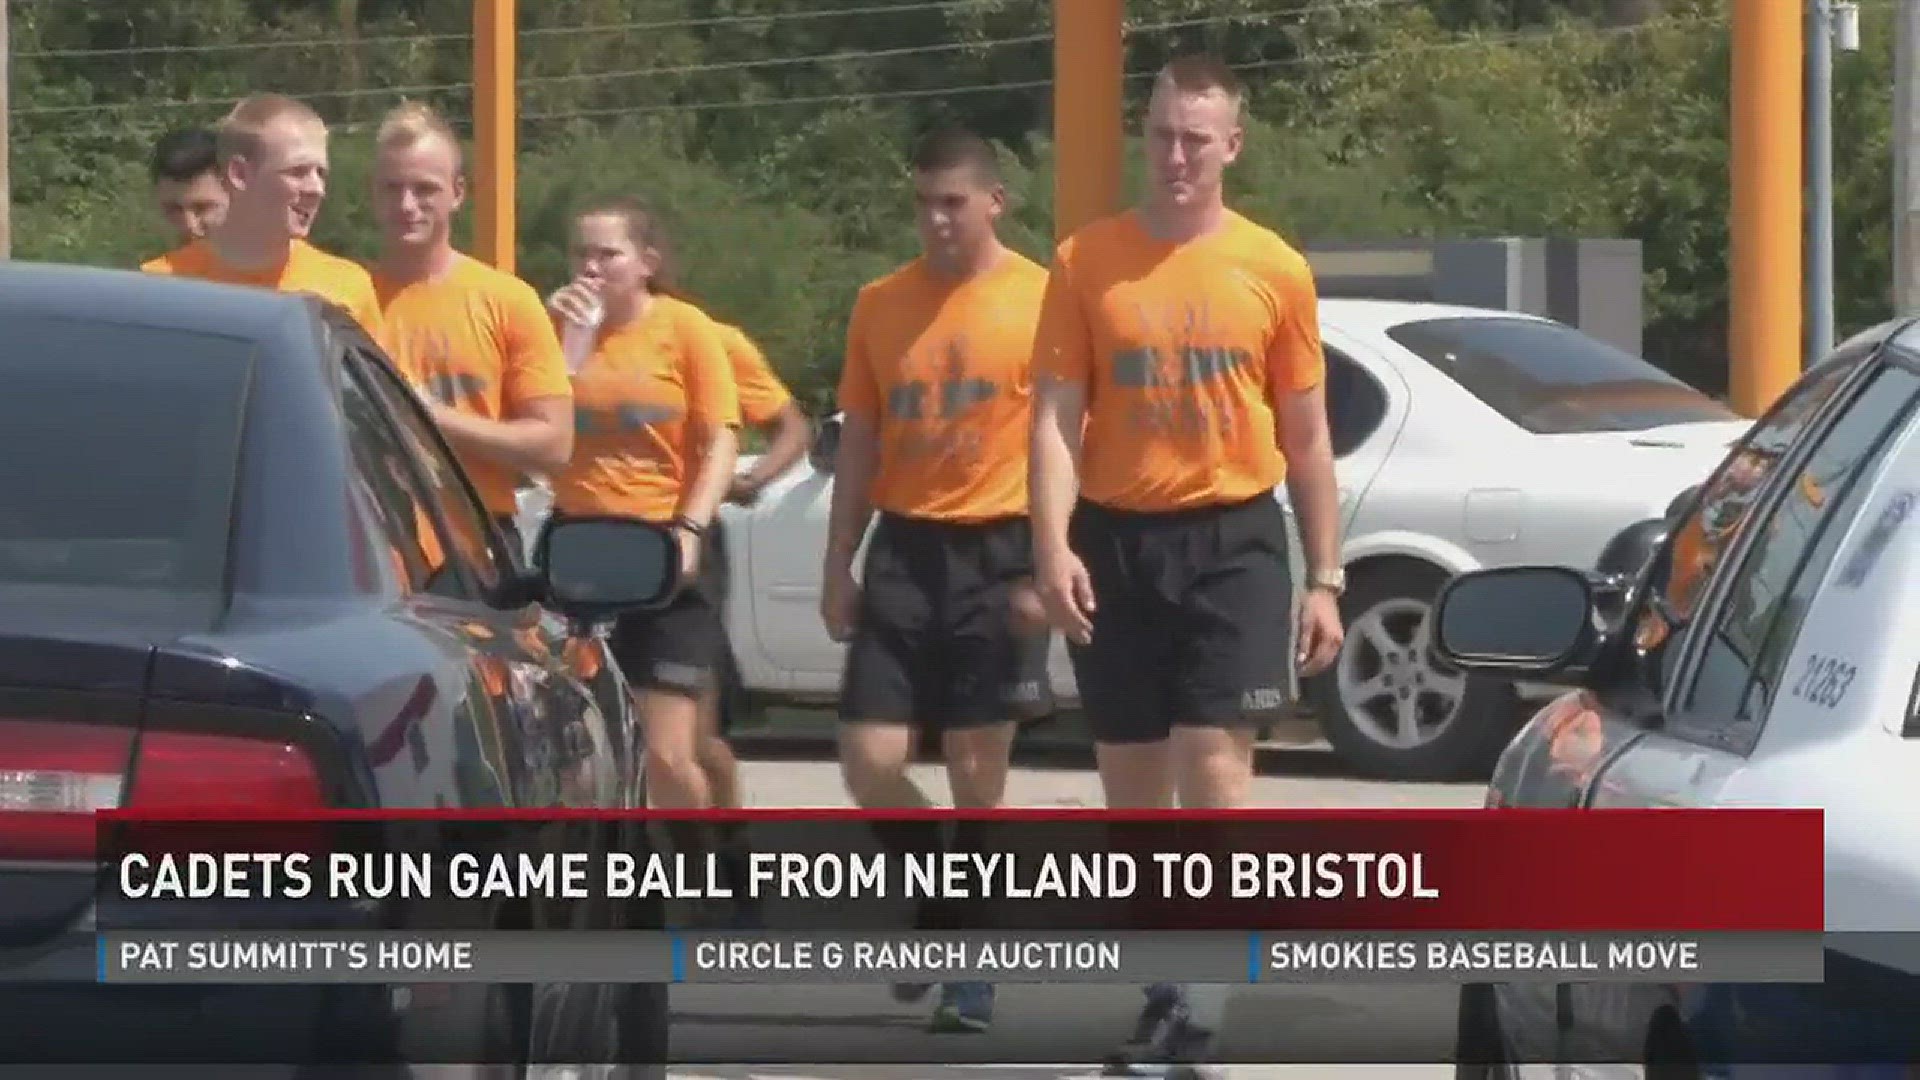 University of Tennessee Army Cadets take a break after trekking nearly 90 miles to take the game ball from Neyland Stadium to the Bristol Motor Speedway (10 p.m. 9-9-16)